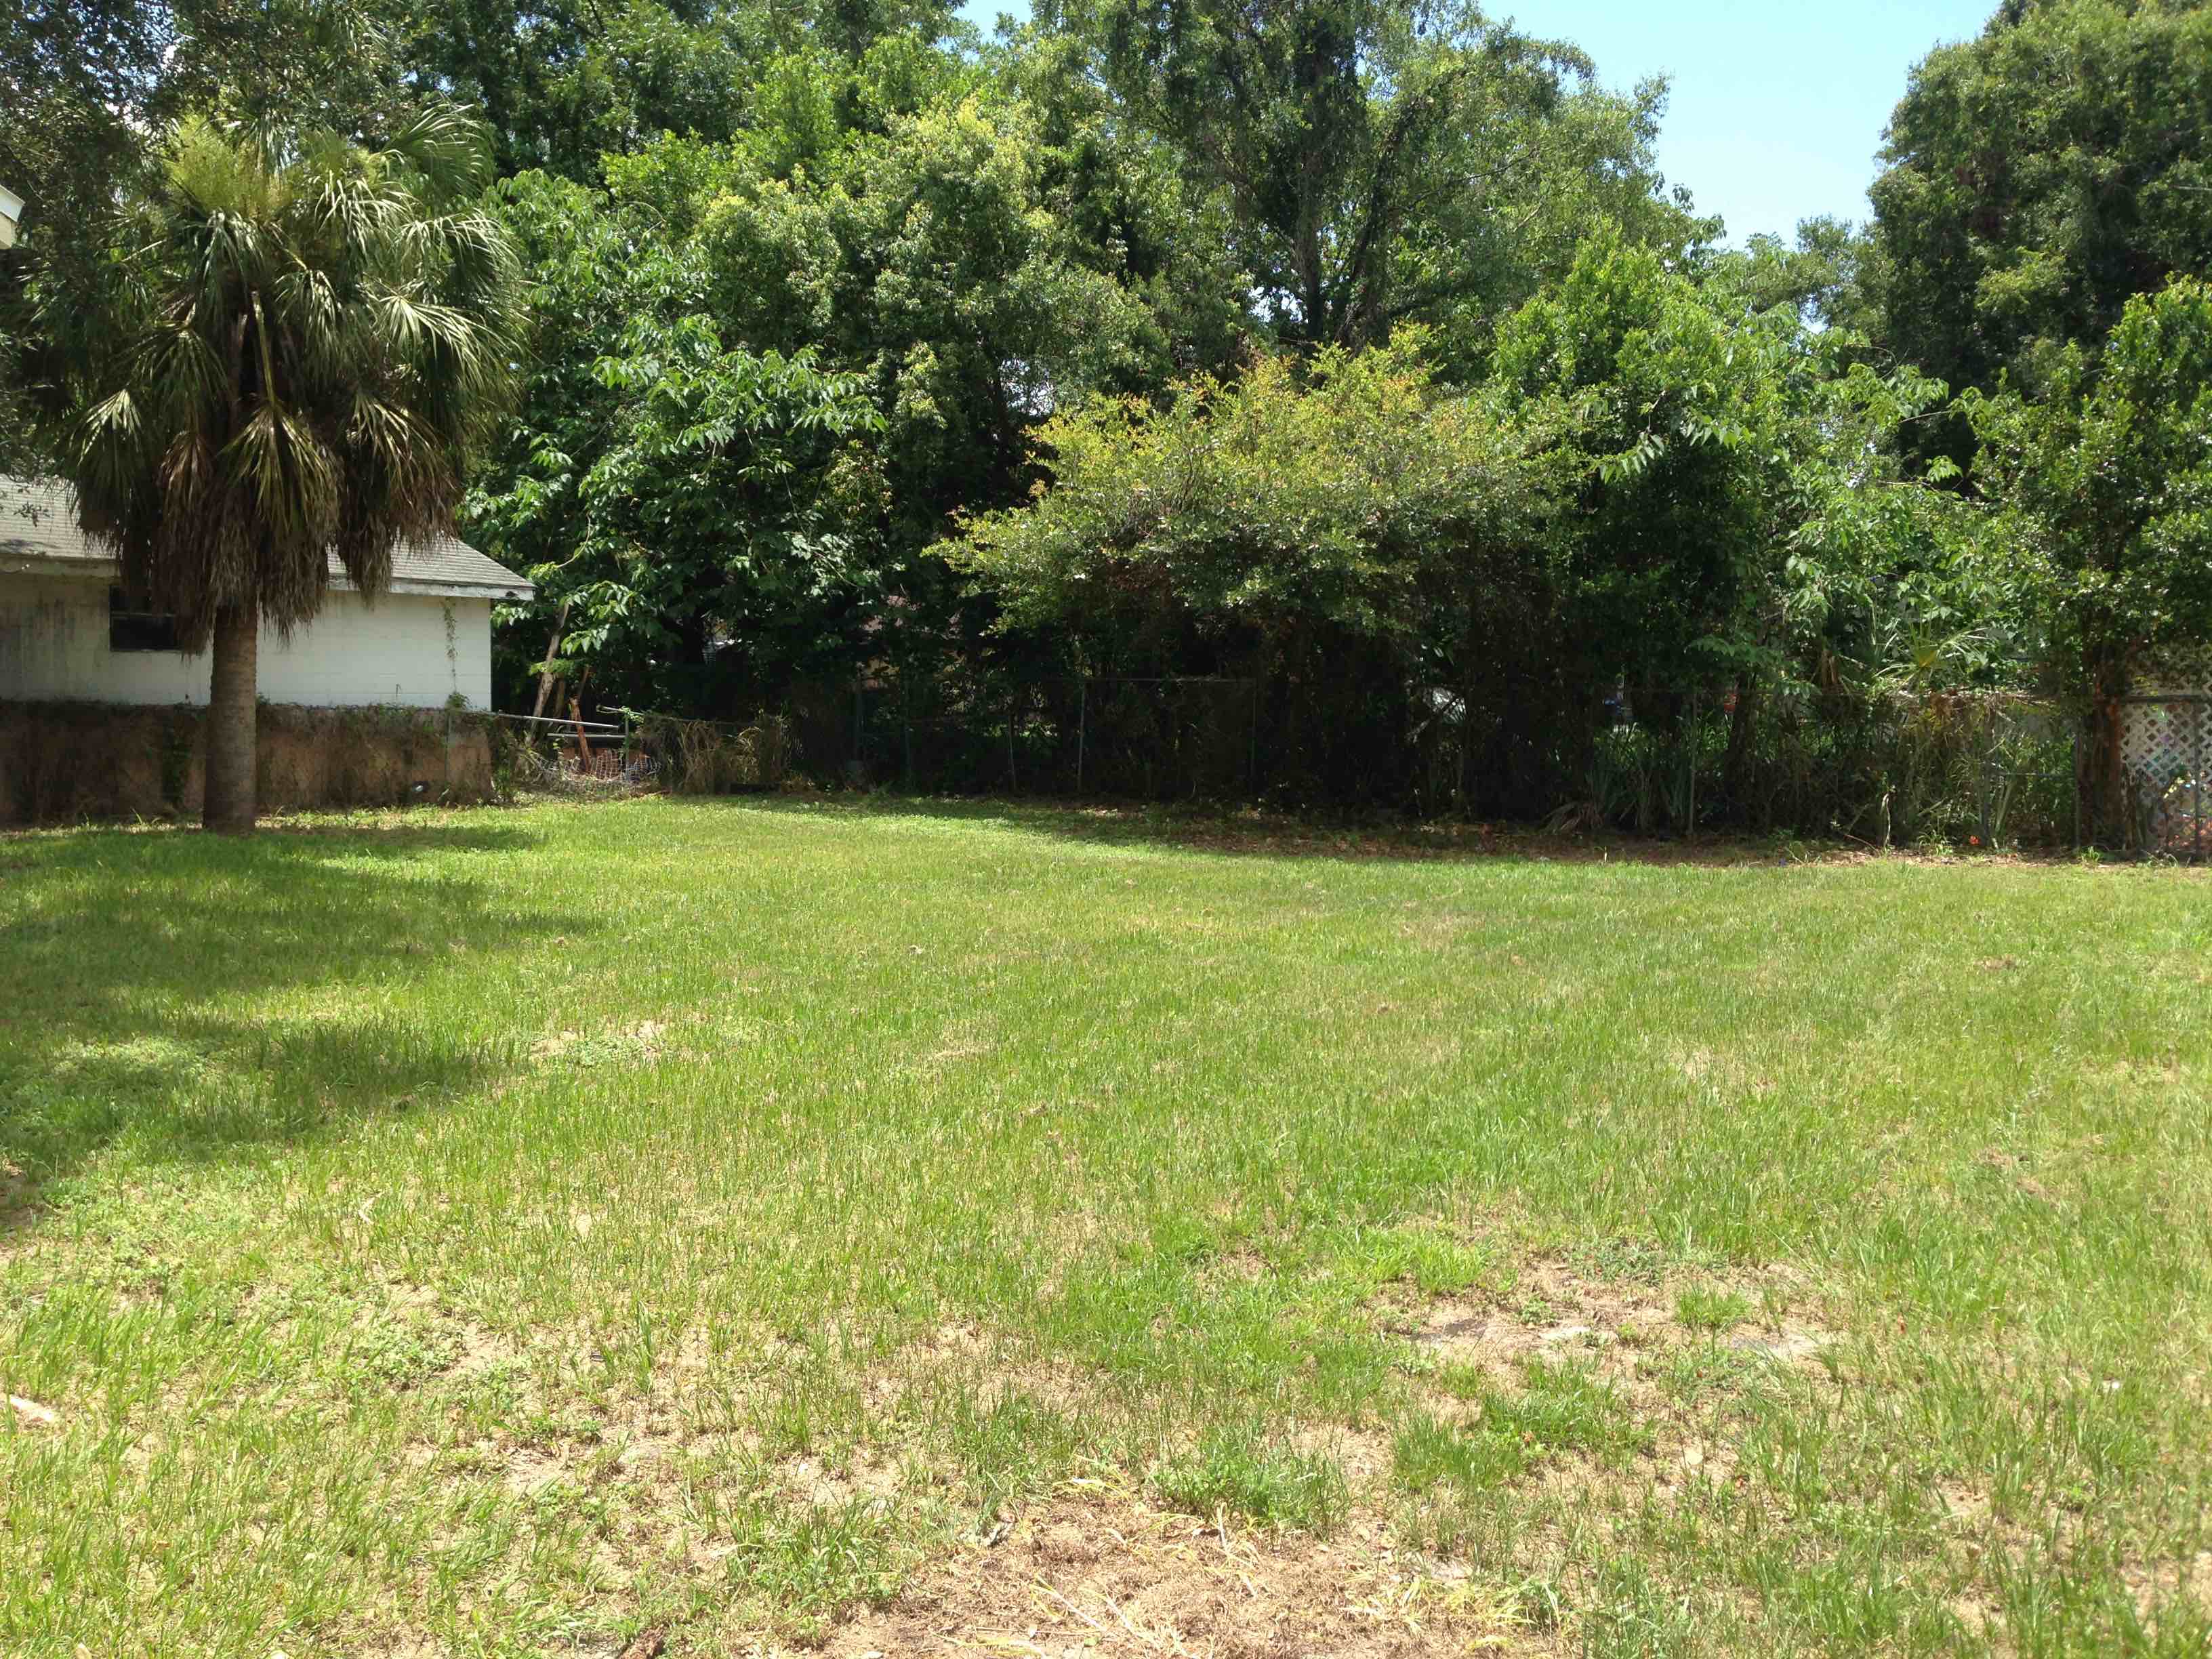 2 Bedrooms, Single Family, Rental For sale, Ellicott, 1 Bathrooms, Listing ID undefined, Tamp, Florida, United States, 33610,